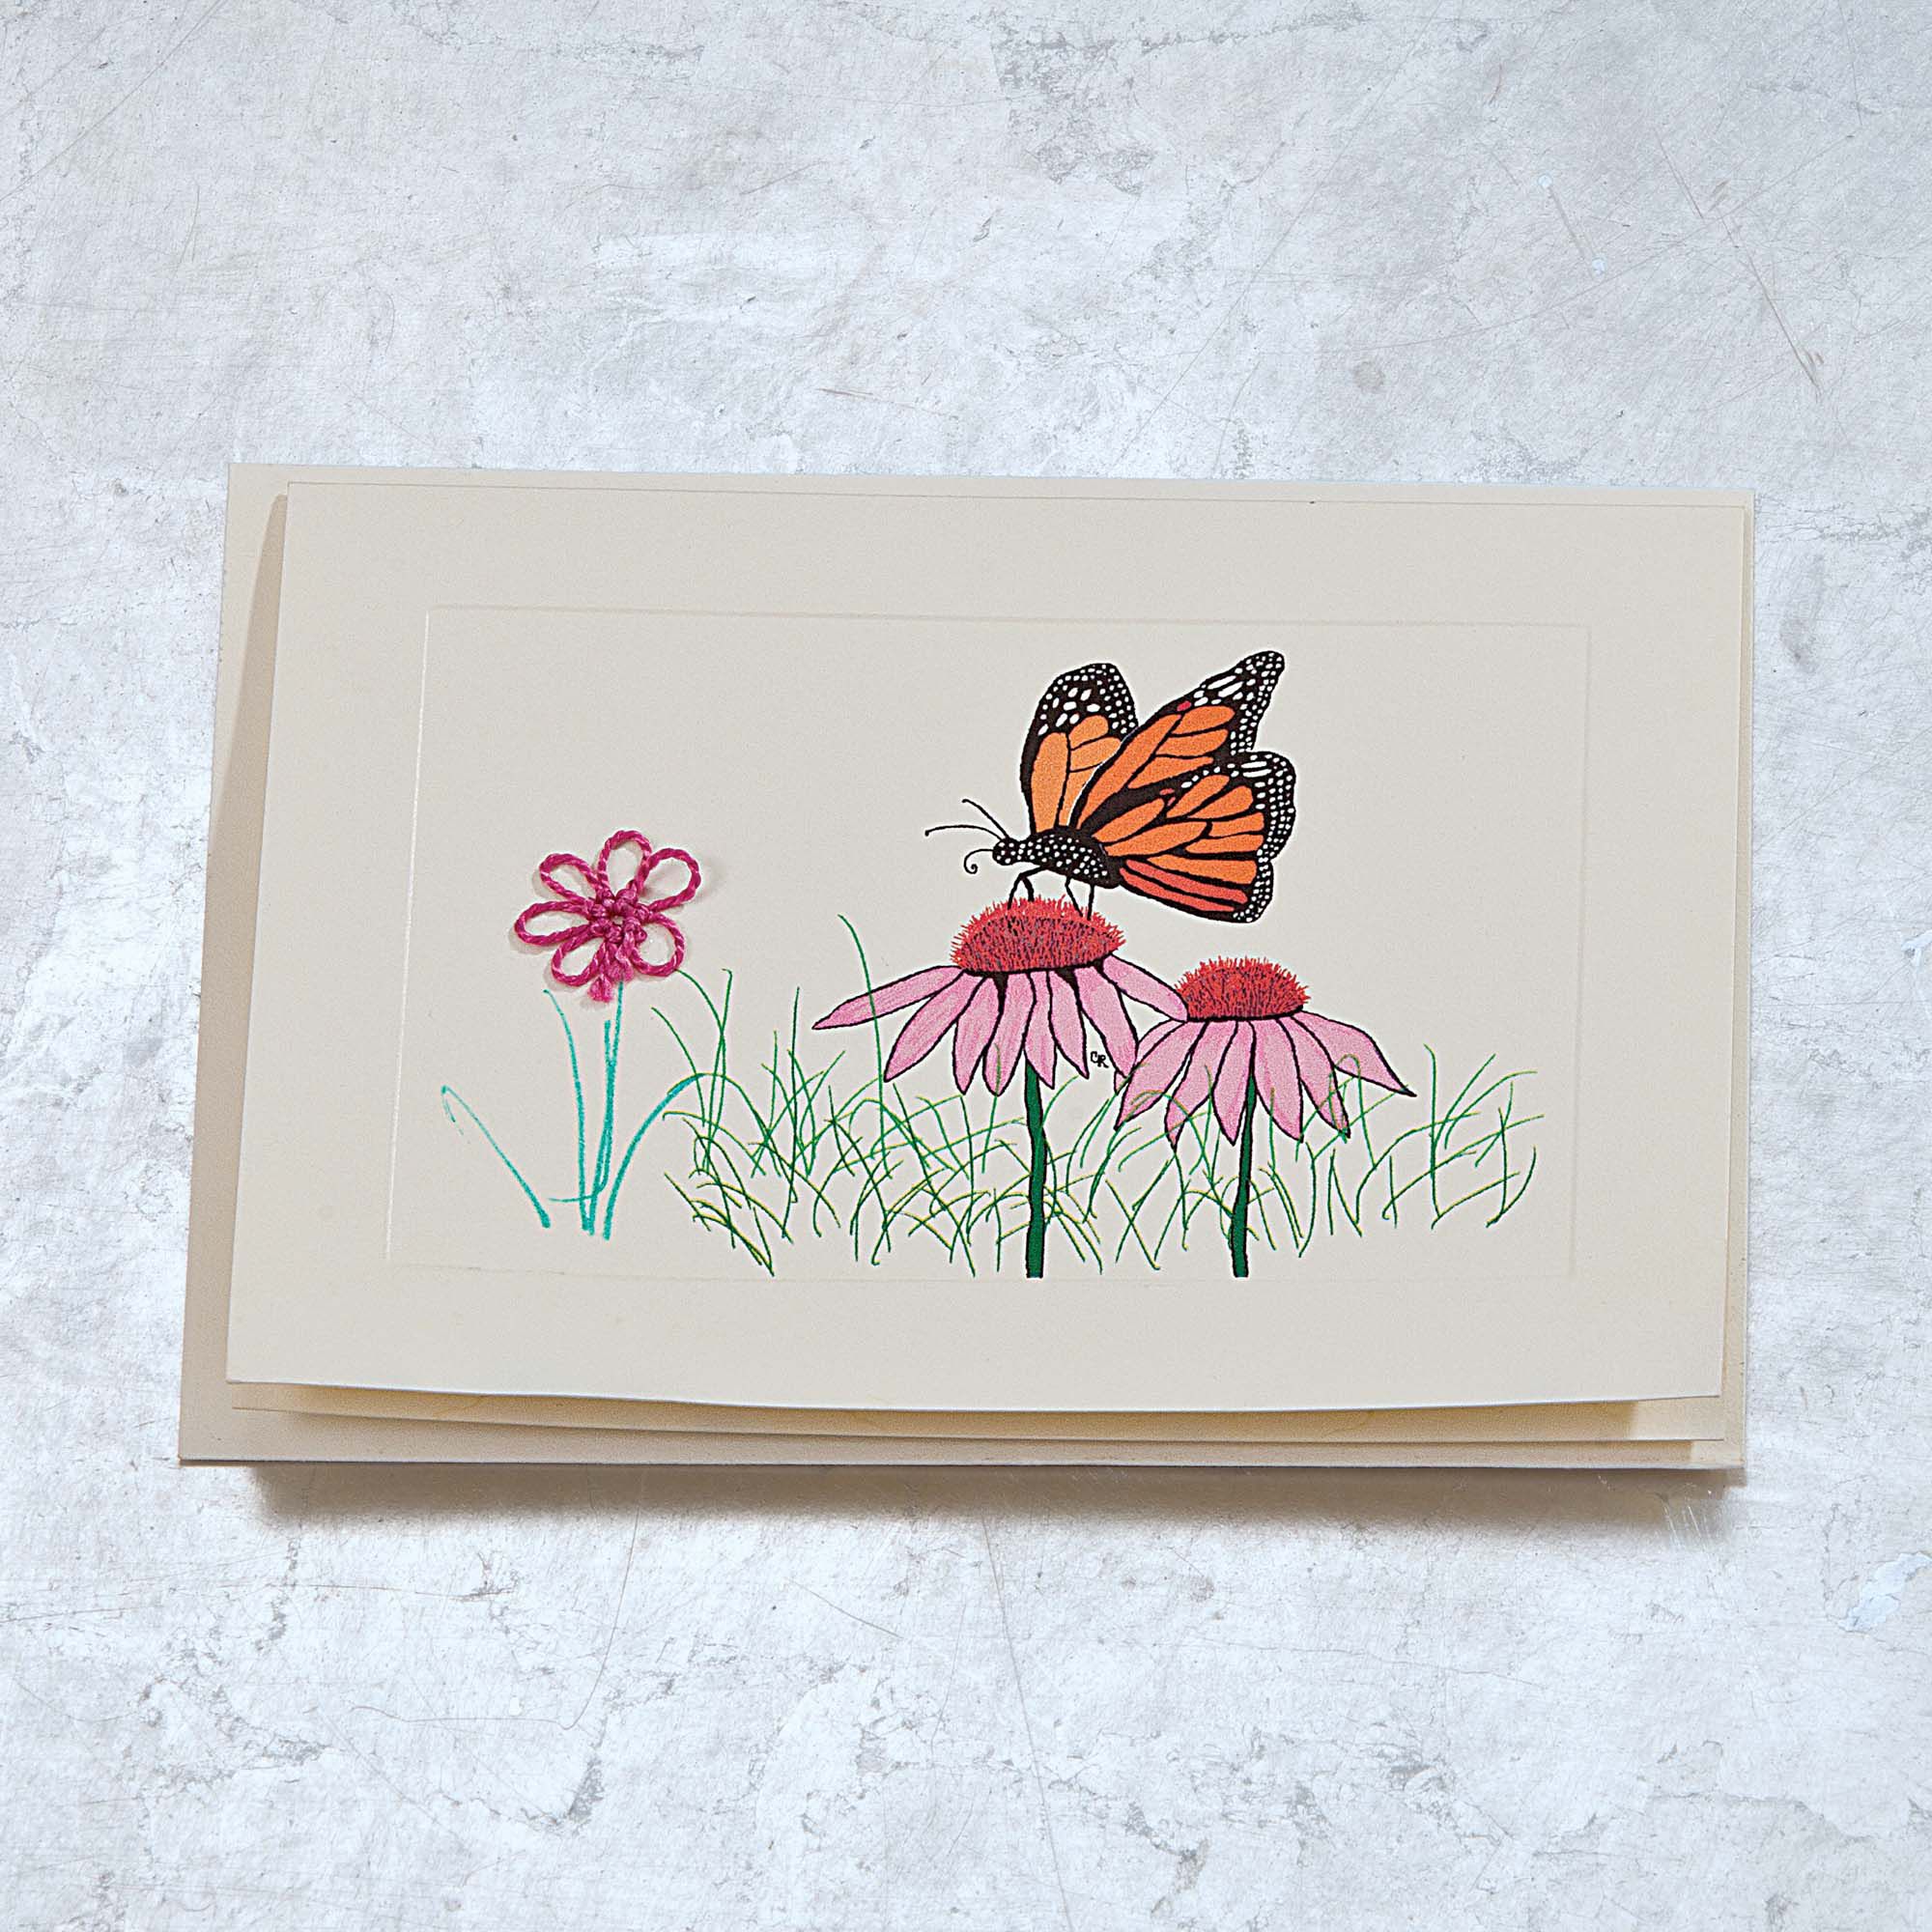 Hand-Tatted Springtime Cards Set of 6